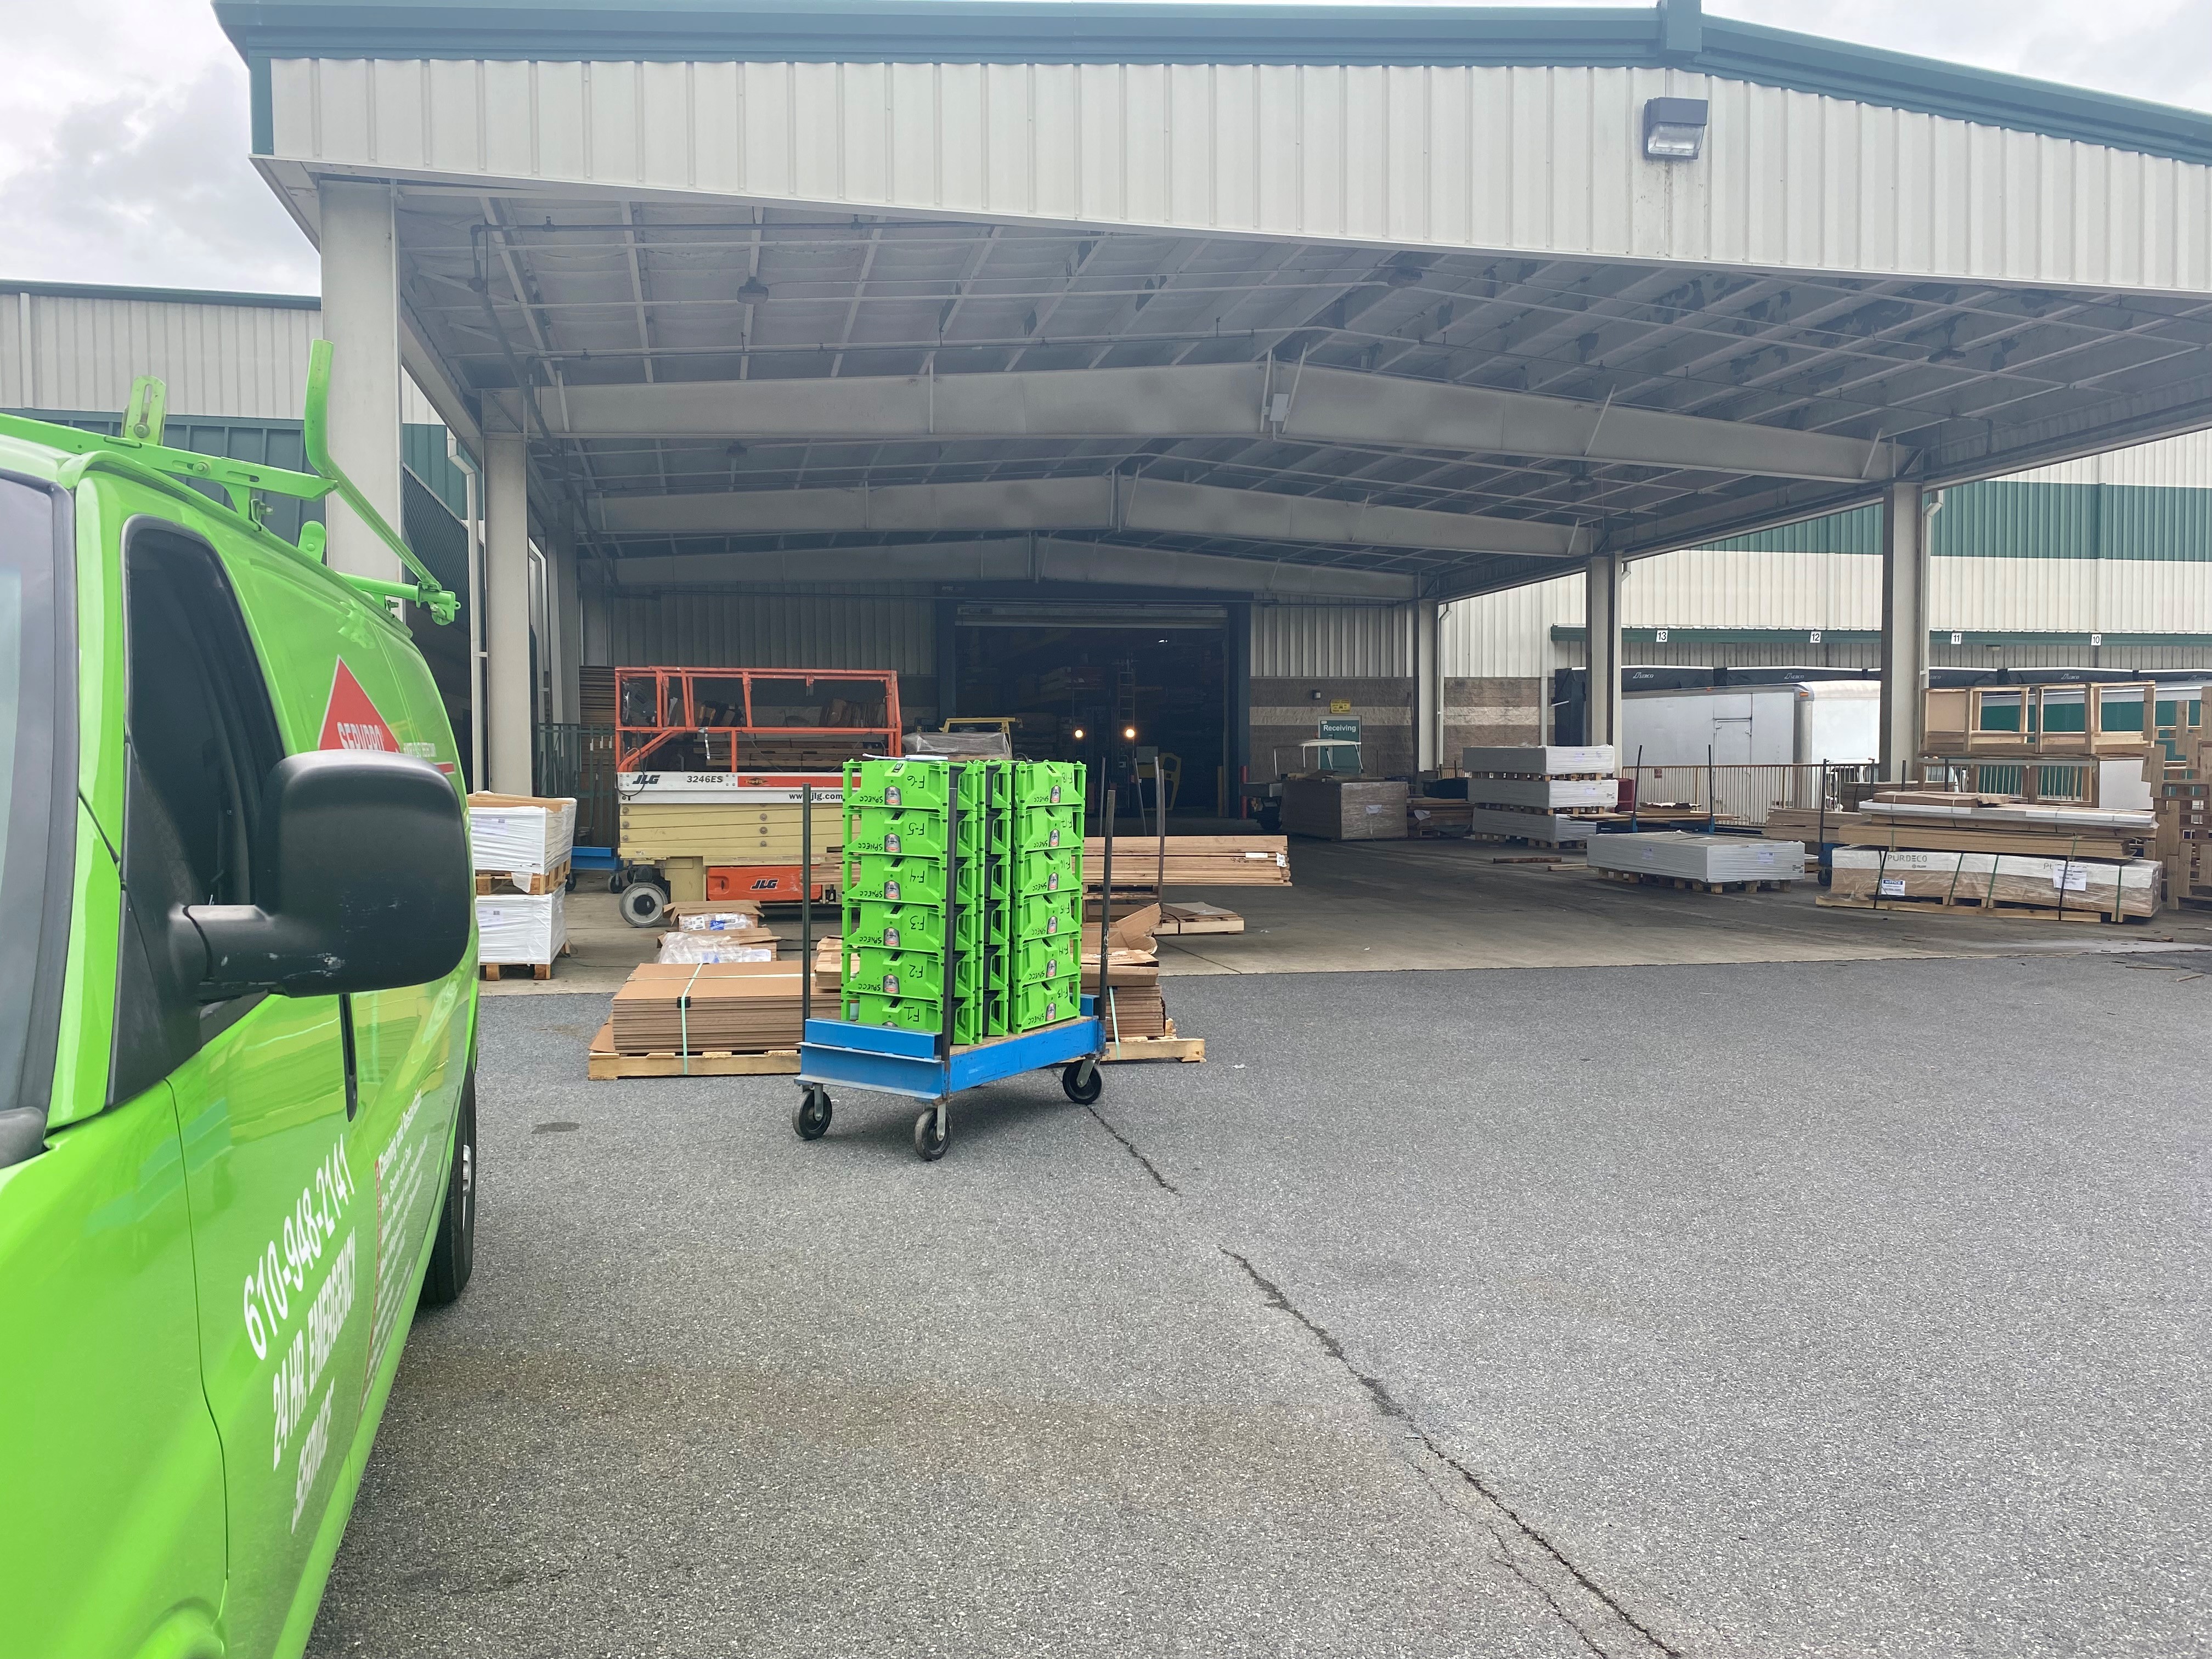 When you need a restoration or cleaning professional for your Phoenixville, PA commercial property, SERVPRO of North East Chester County is ready to respond immediately and work quickly to clean or restore your business.